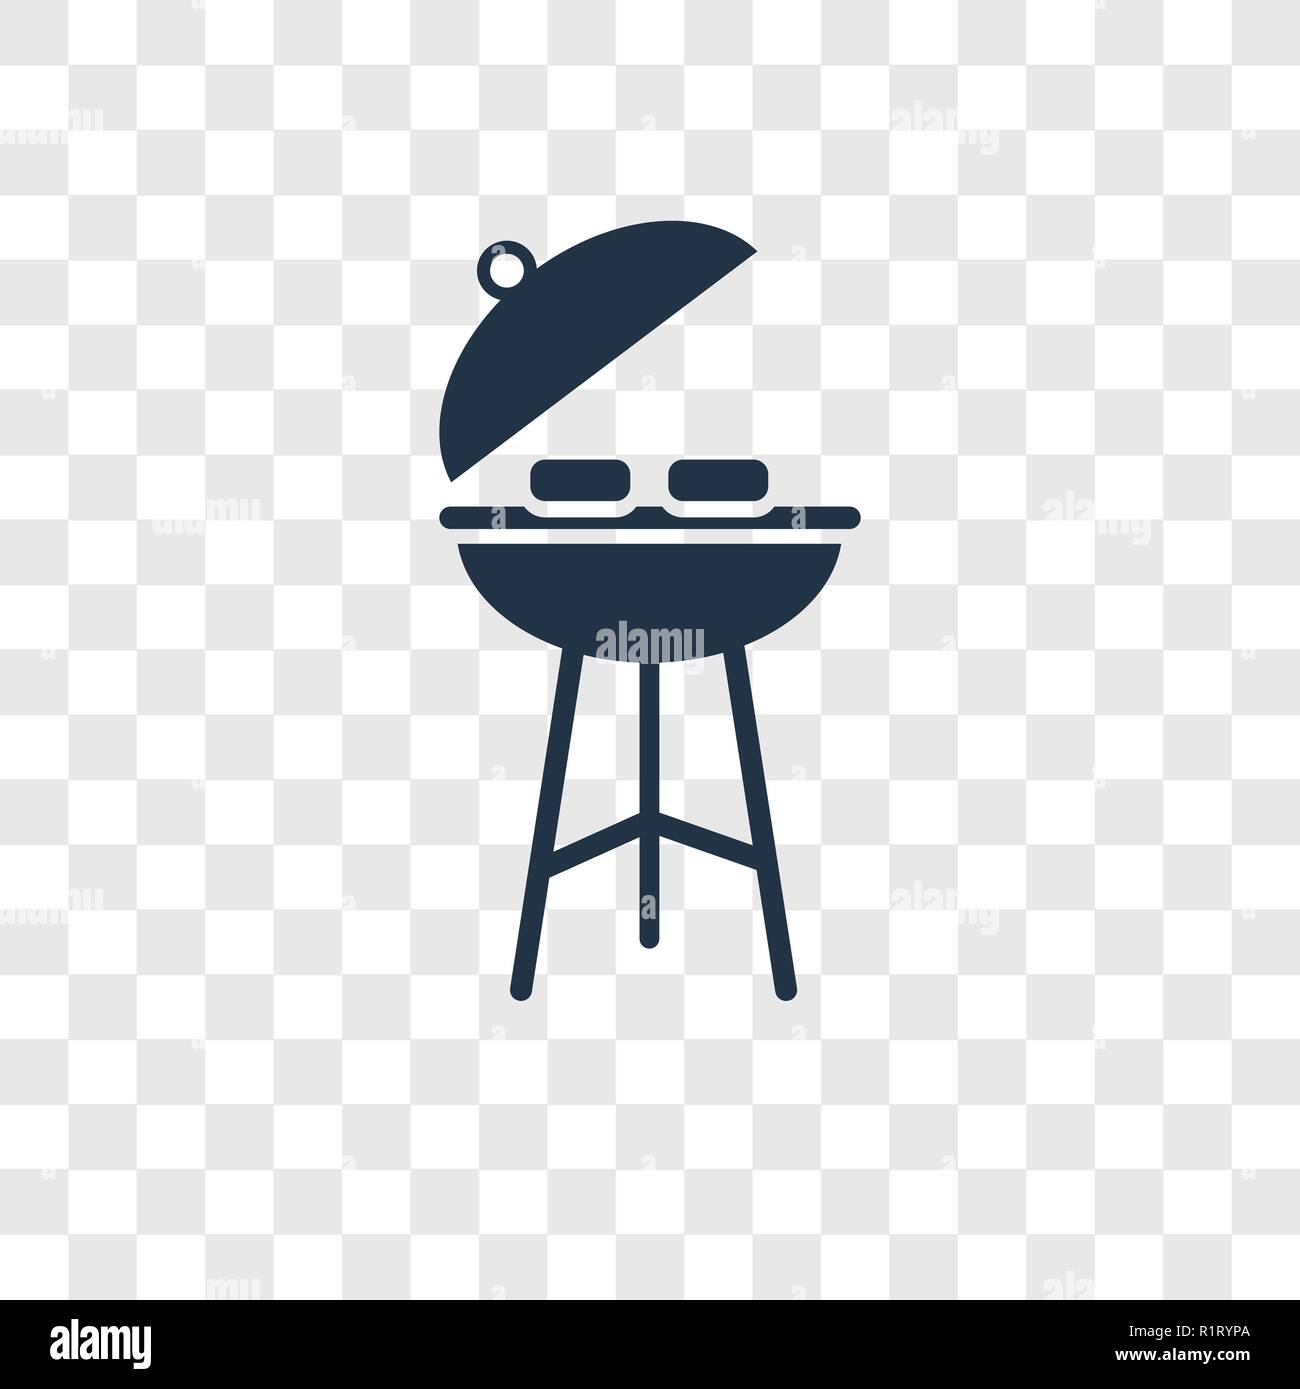 Barbecue Equipment - Pictogram Stock Vector - Illustration of